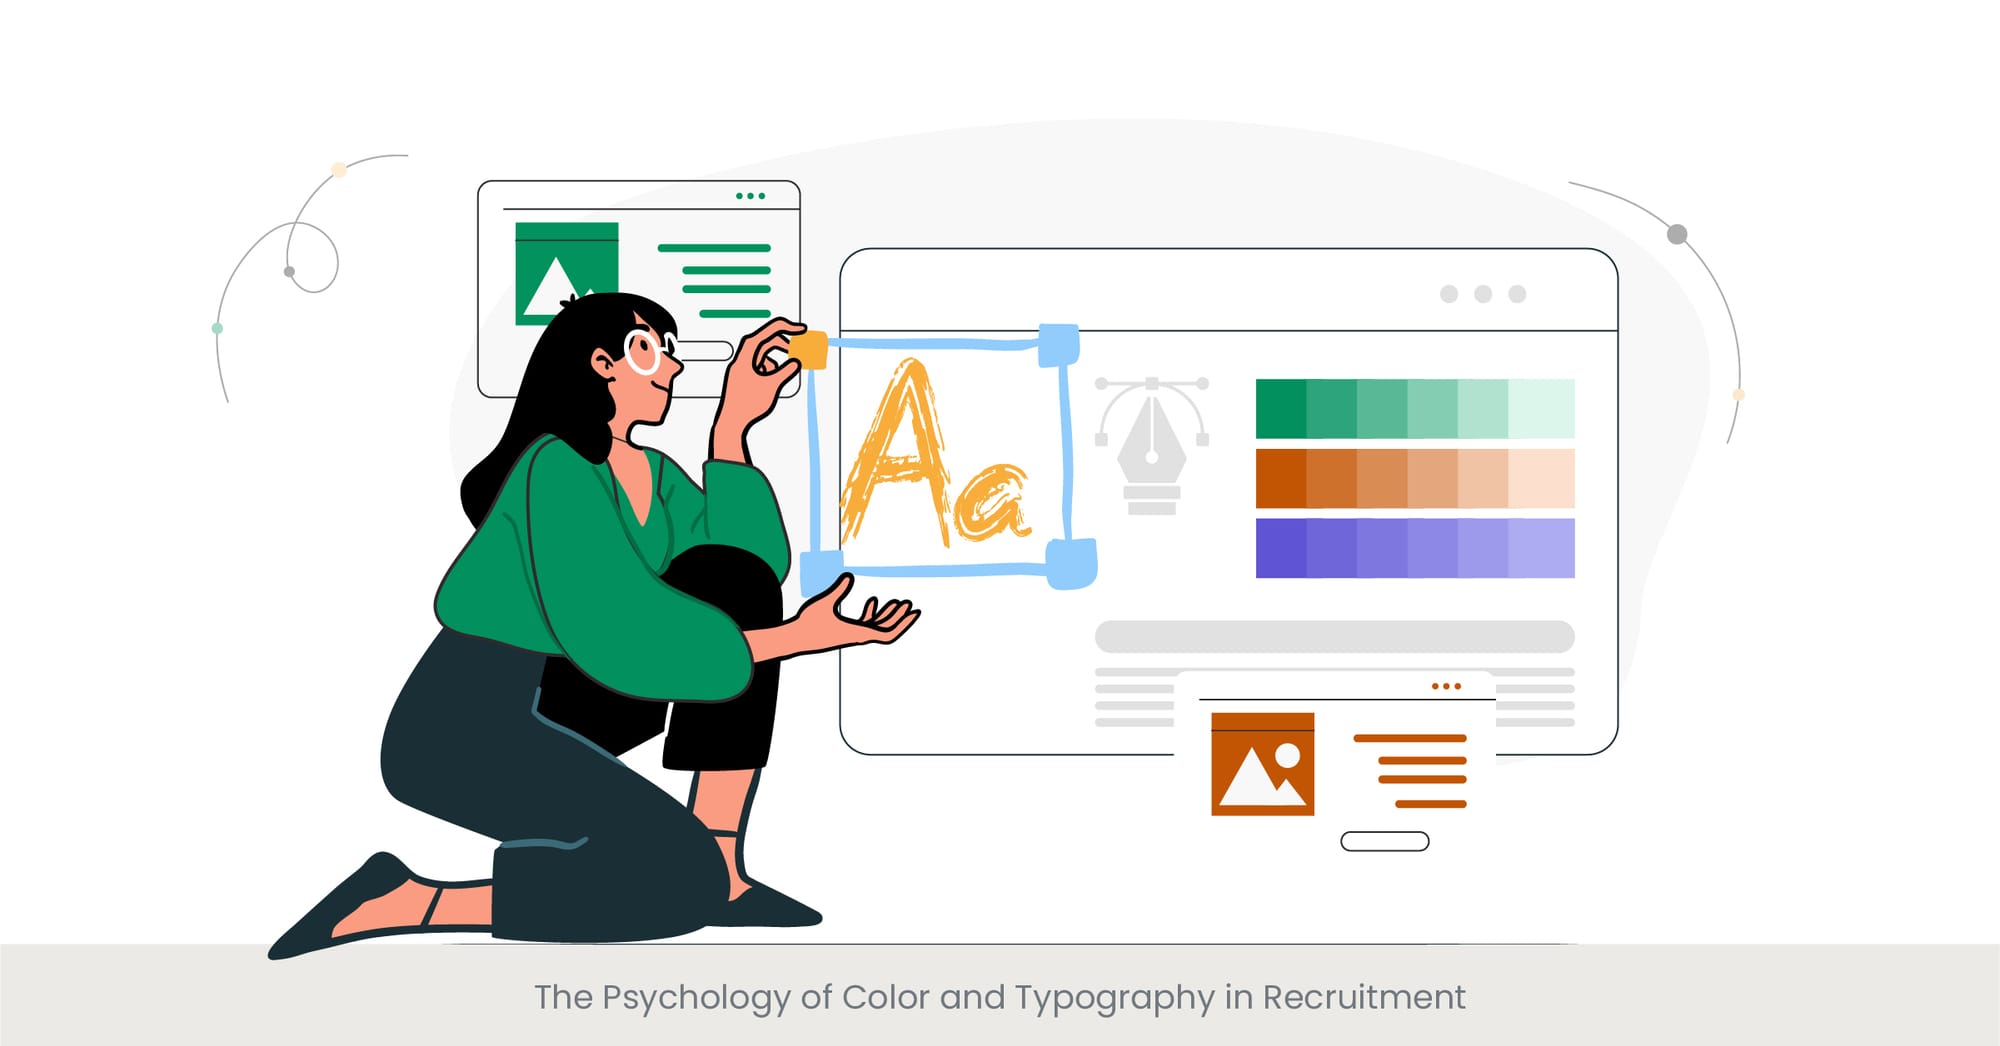 The Psychology of Color and Typography in Recruitment